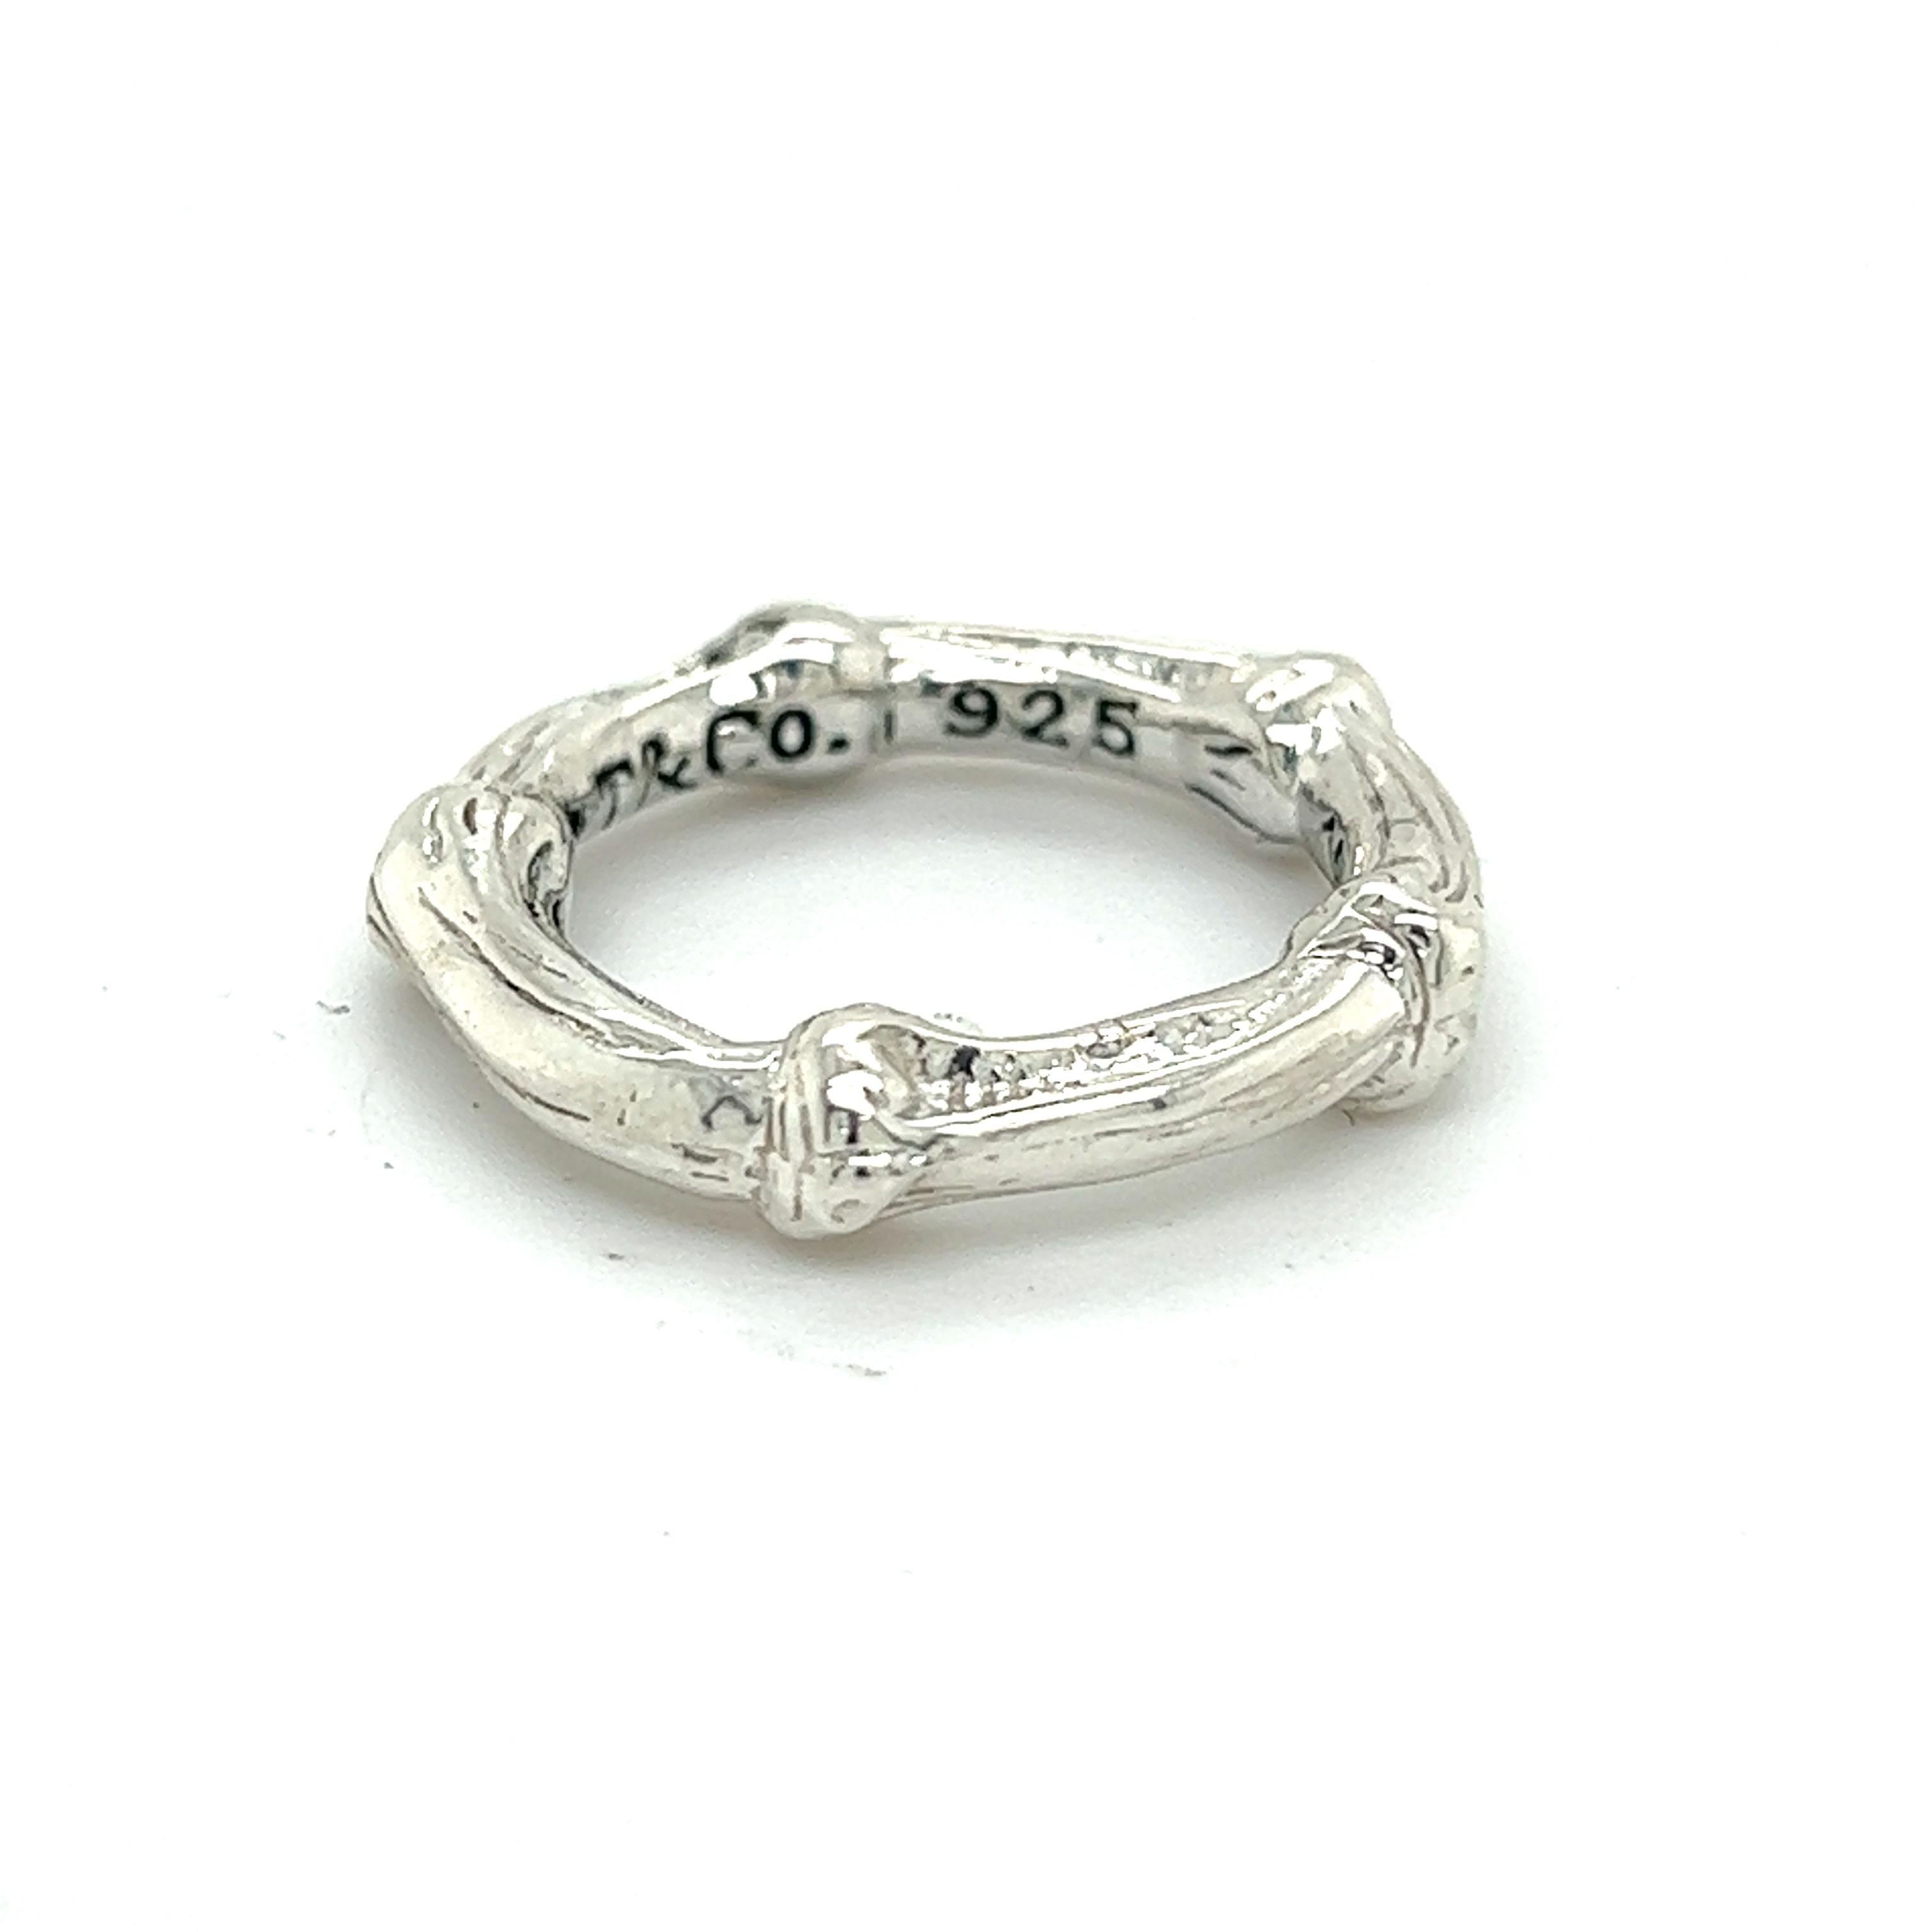 Authentic Tiffany & Co Estate Bamboo Ring Size 5.5 Sterling Silver TIF381

TRUSTED SELLER SINCE 2002

PLEASE SEE OUR HUNDREDS OF POSITIVE FEEDBACKS FROM OUR CLIENTS!!

FREE SHIPPING

DETAILS
Style: Bamboo
Size: 5.5
Metal: Sterling Silver
Weight: 5.3